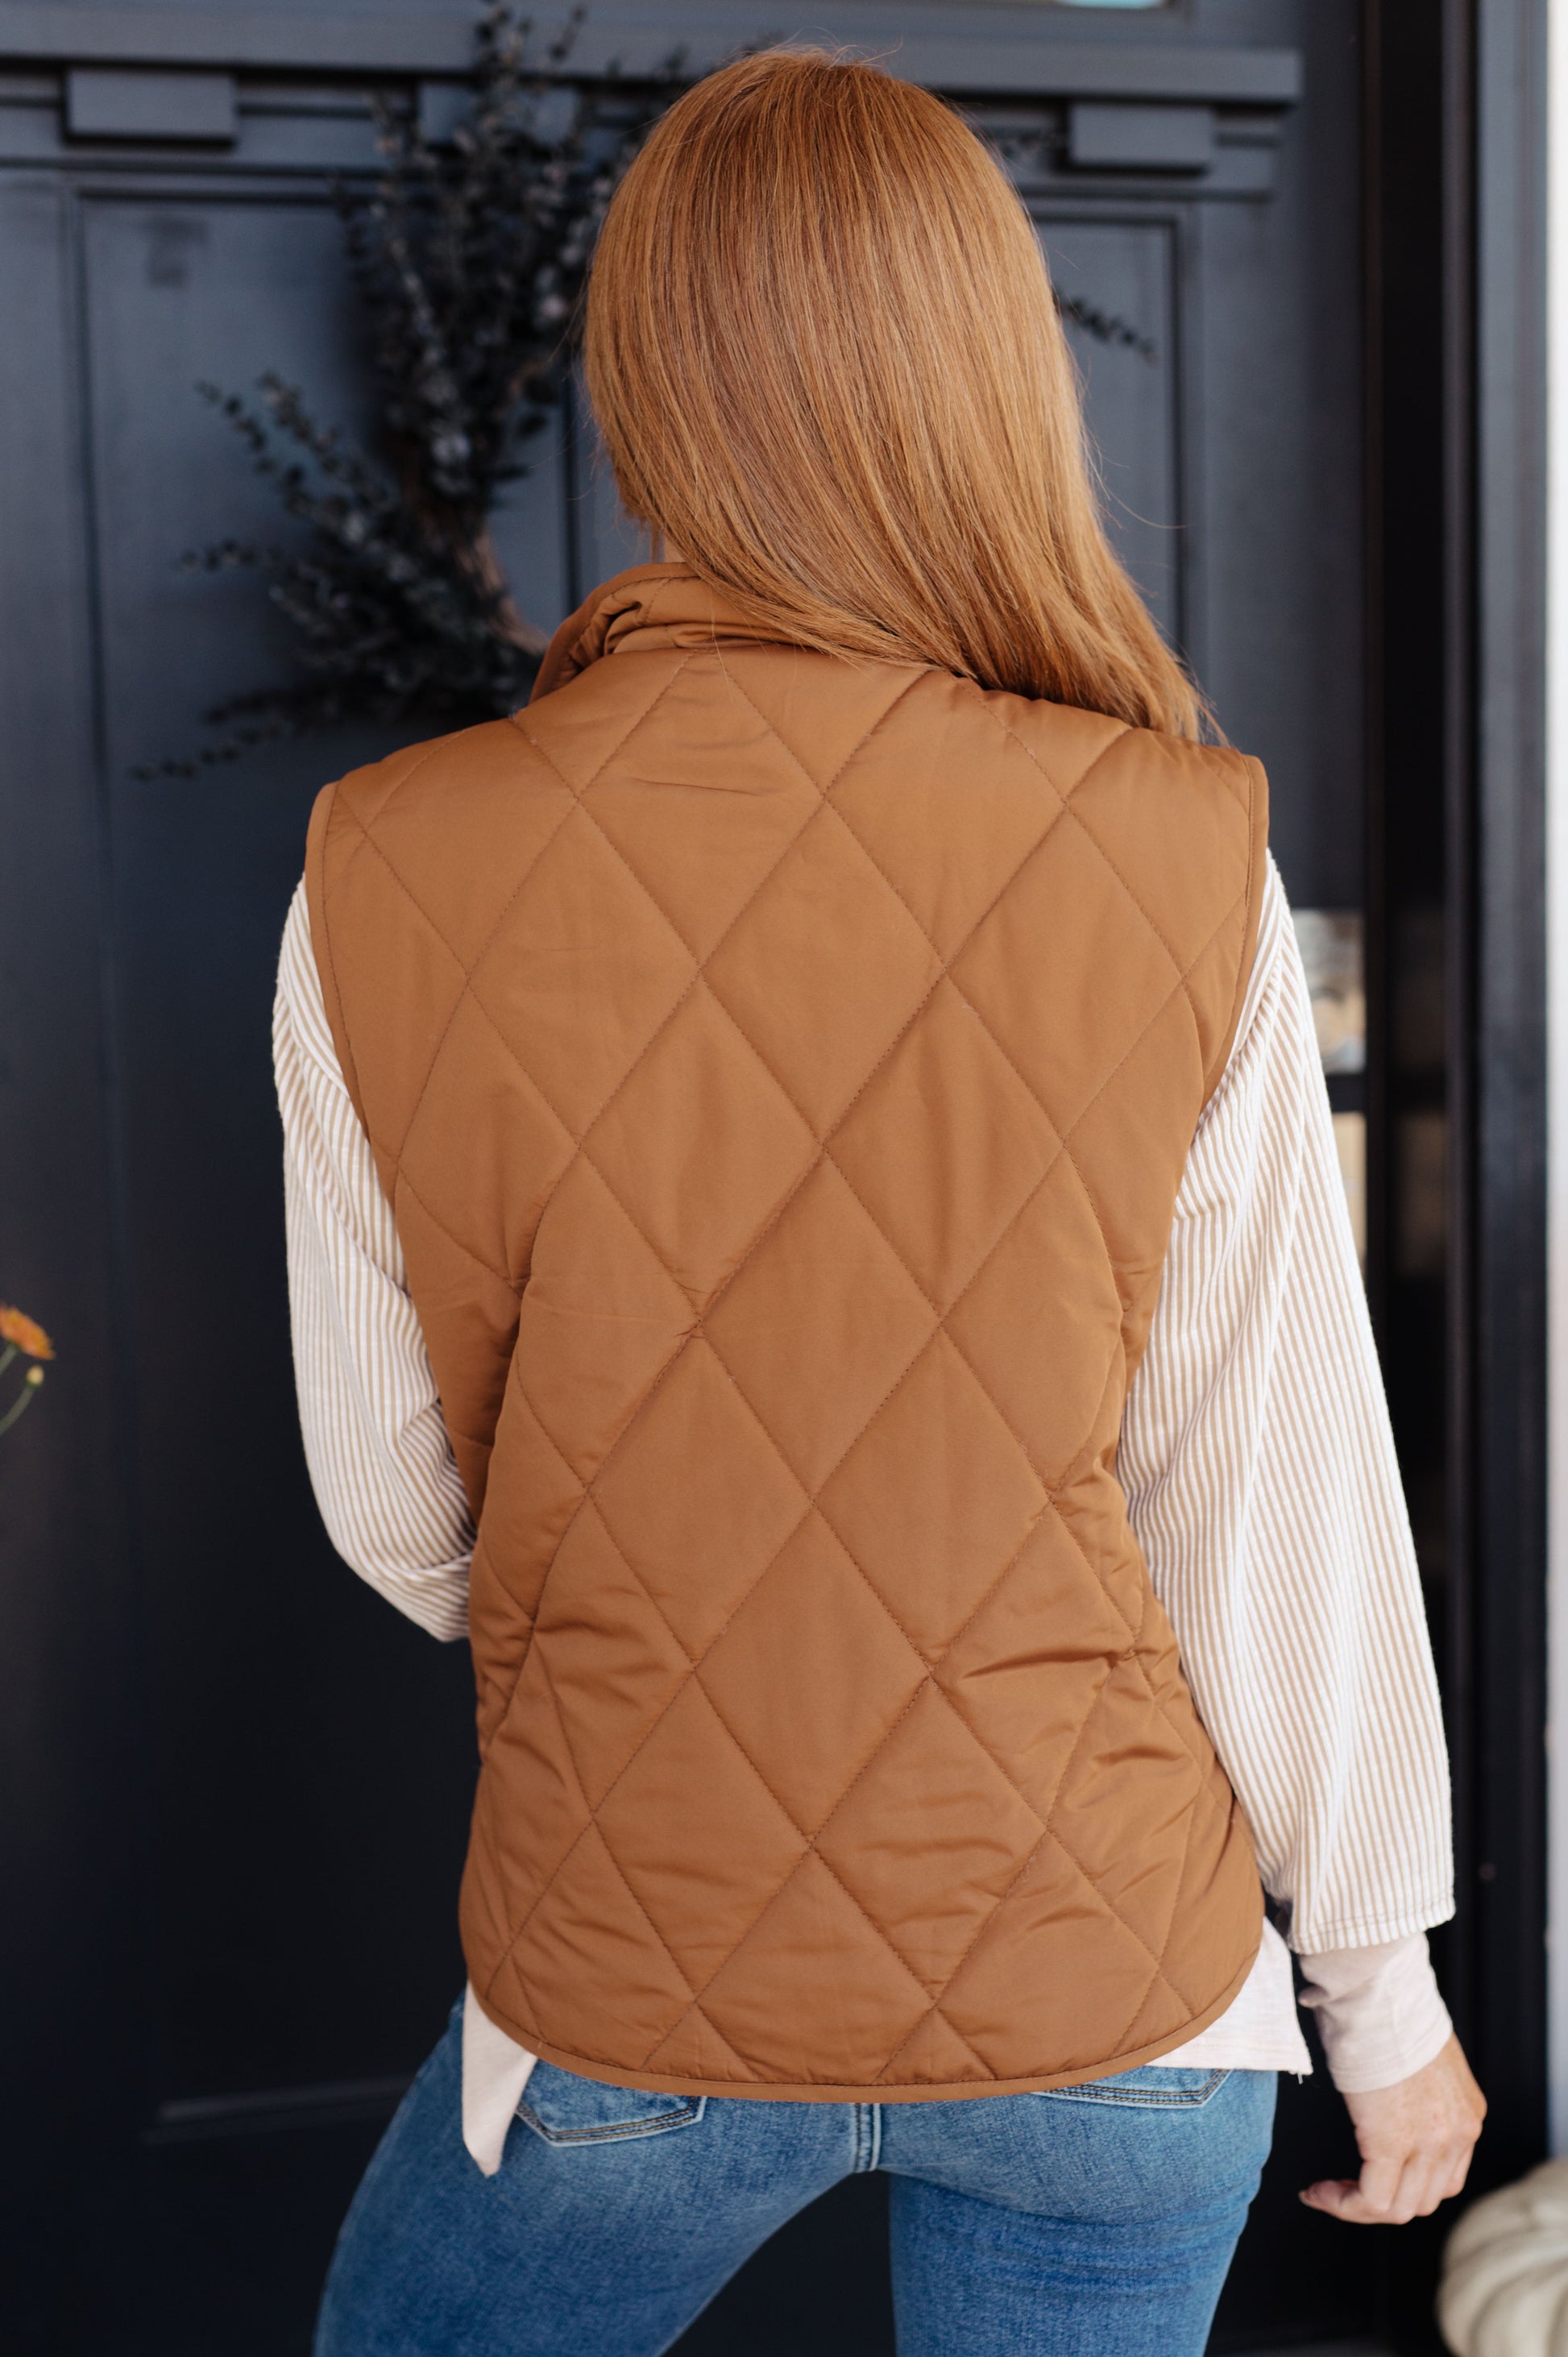 Neither Here Nor There Puffer Vest in Camel - Southern Divas Boutique